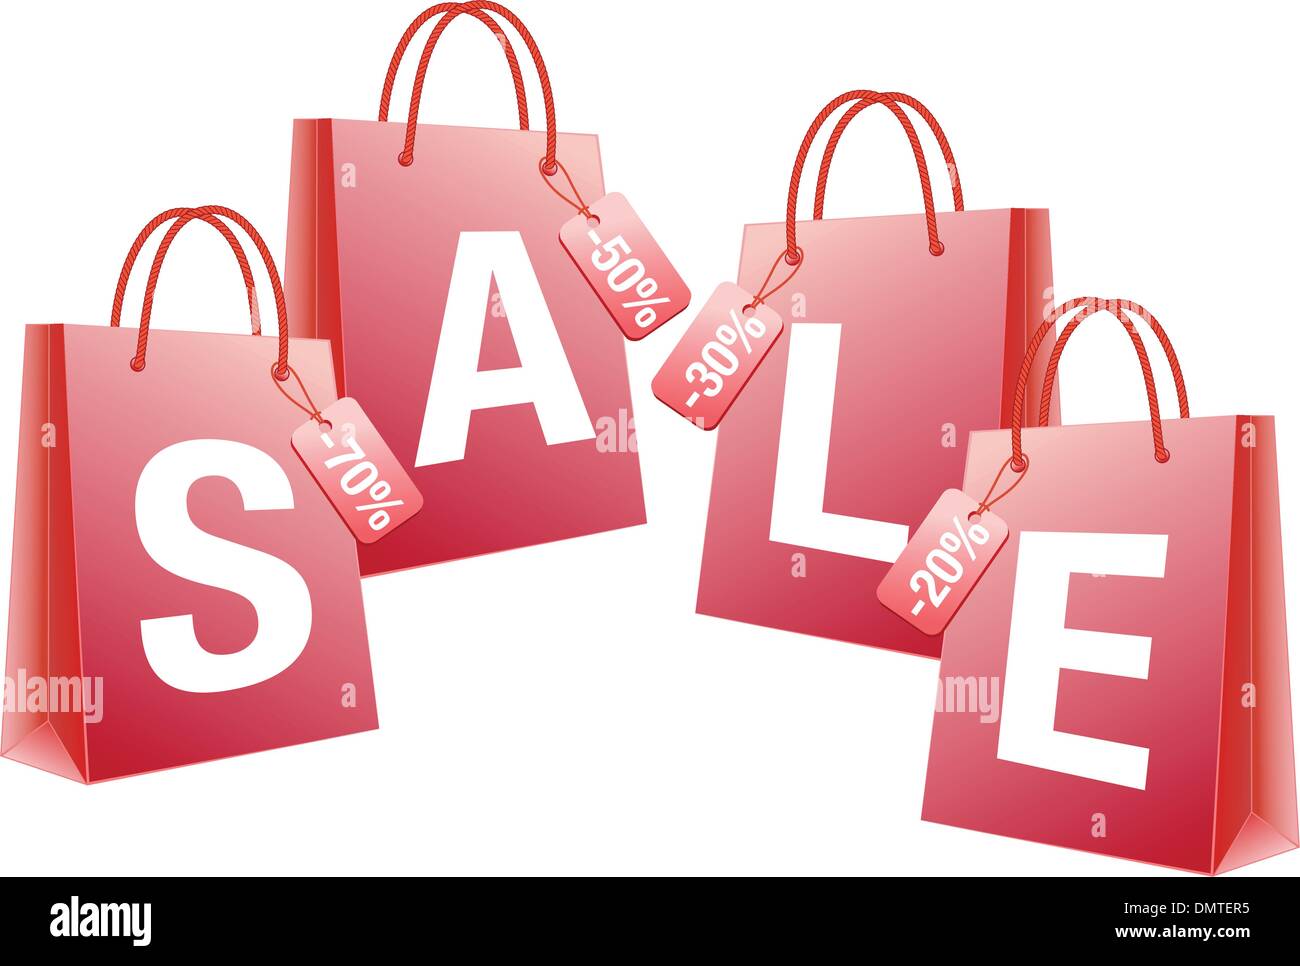 Shopping sale all item red bag background i Vector Image